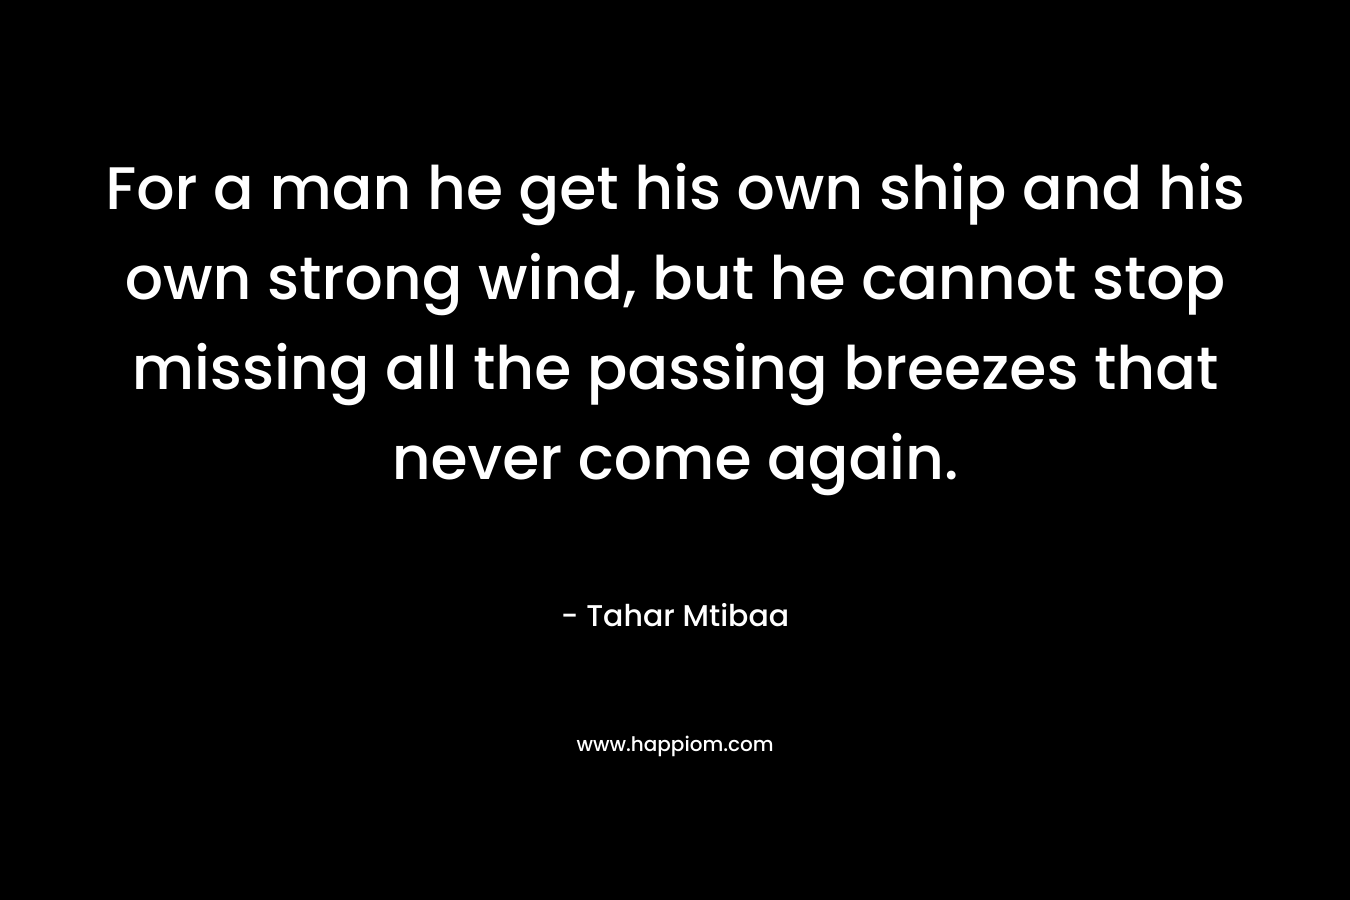 For a man he get his own ship and his own strong wind, but he cannot stop missing all the passing breezes that never come again.